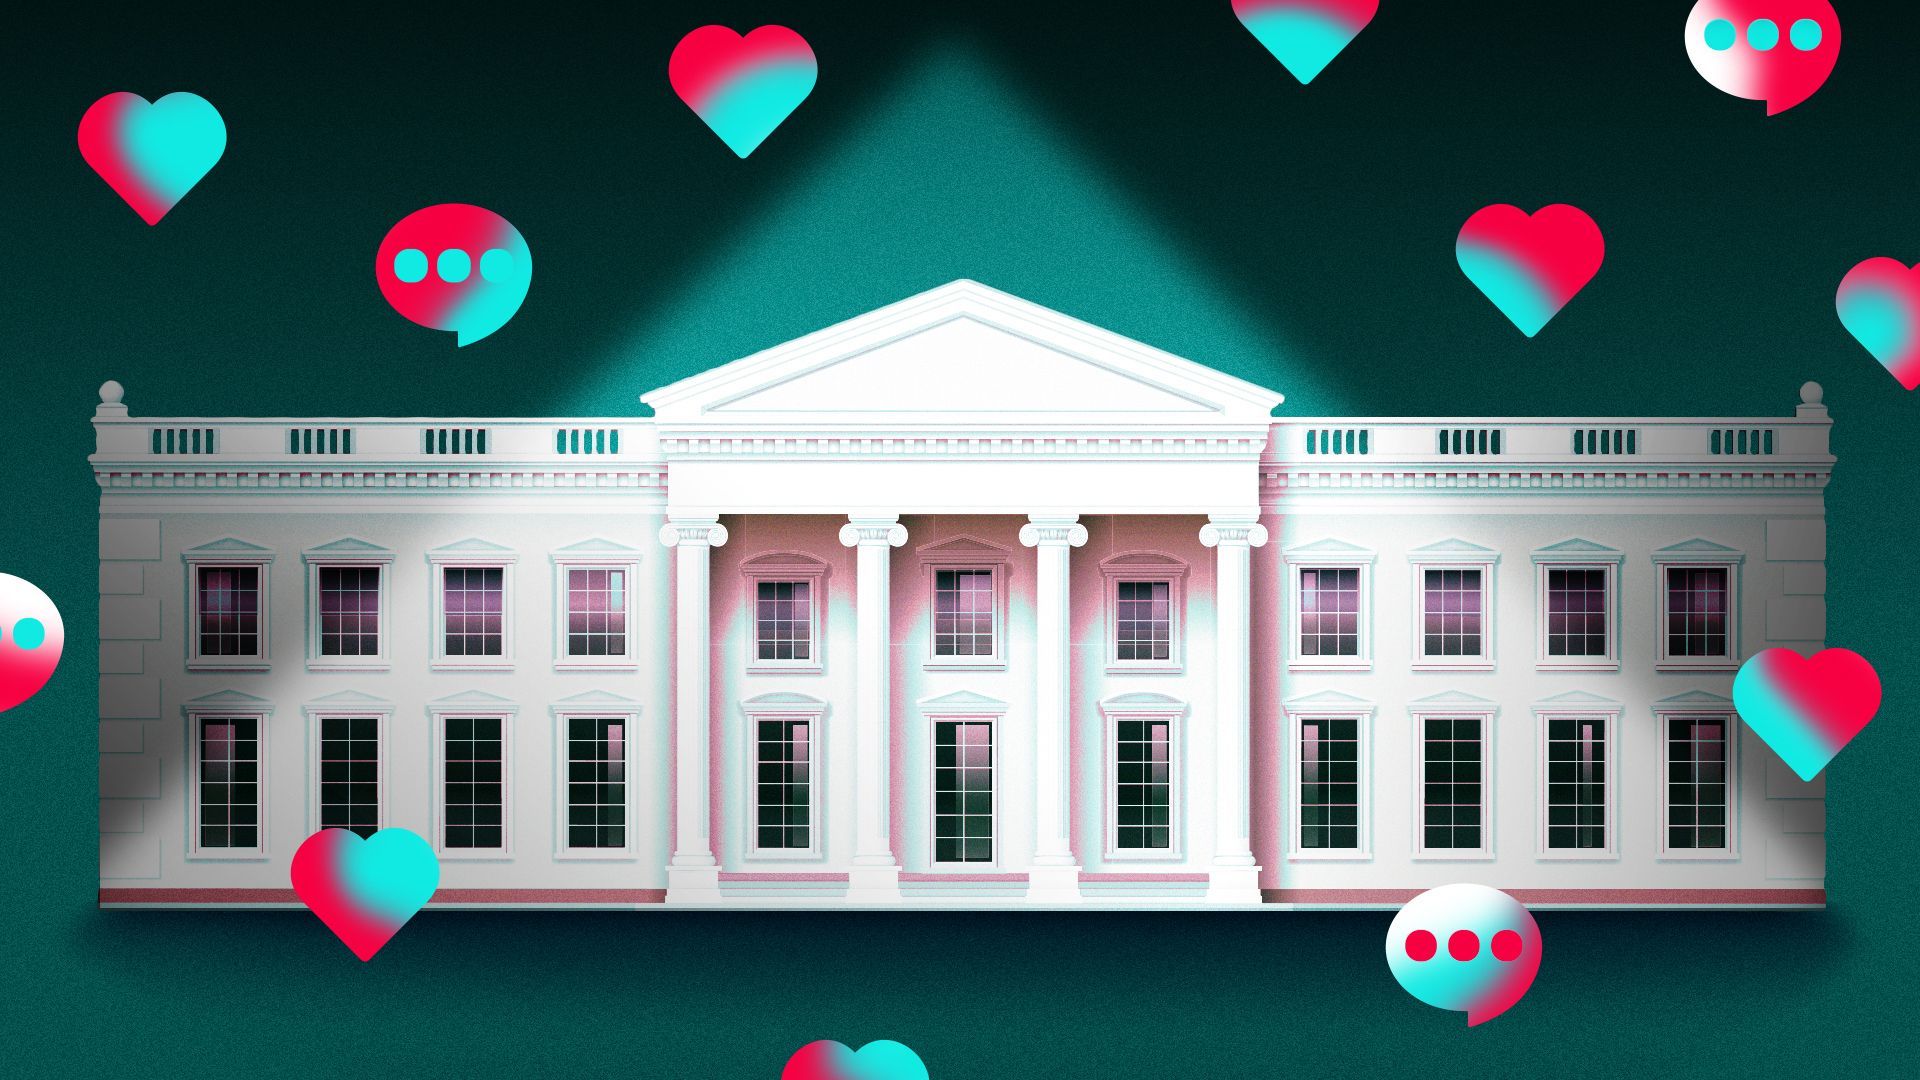 Illustration of the White House under a spotlight, surrounded by heart and speech bubble icons colored with the TikTok brand colors